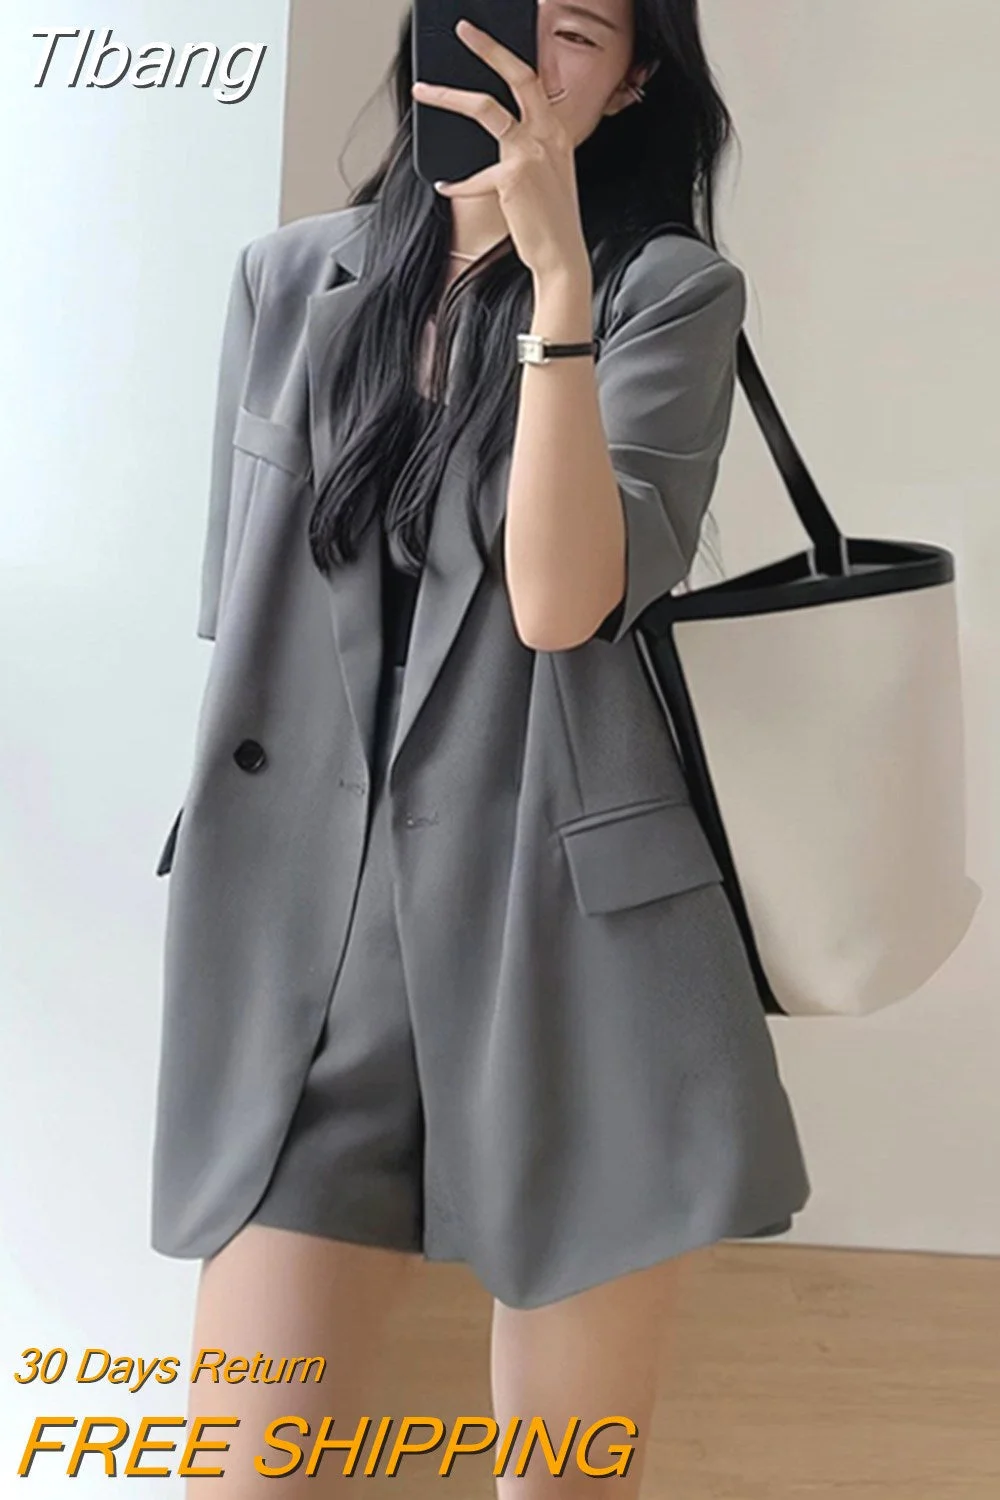 Tlbang Summer Retro Korean Version of the Temperament Short-sleeved Suit Jacket + Shorts Set Casual Loose Suit Two-piece Female